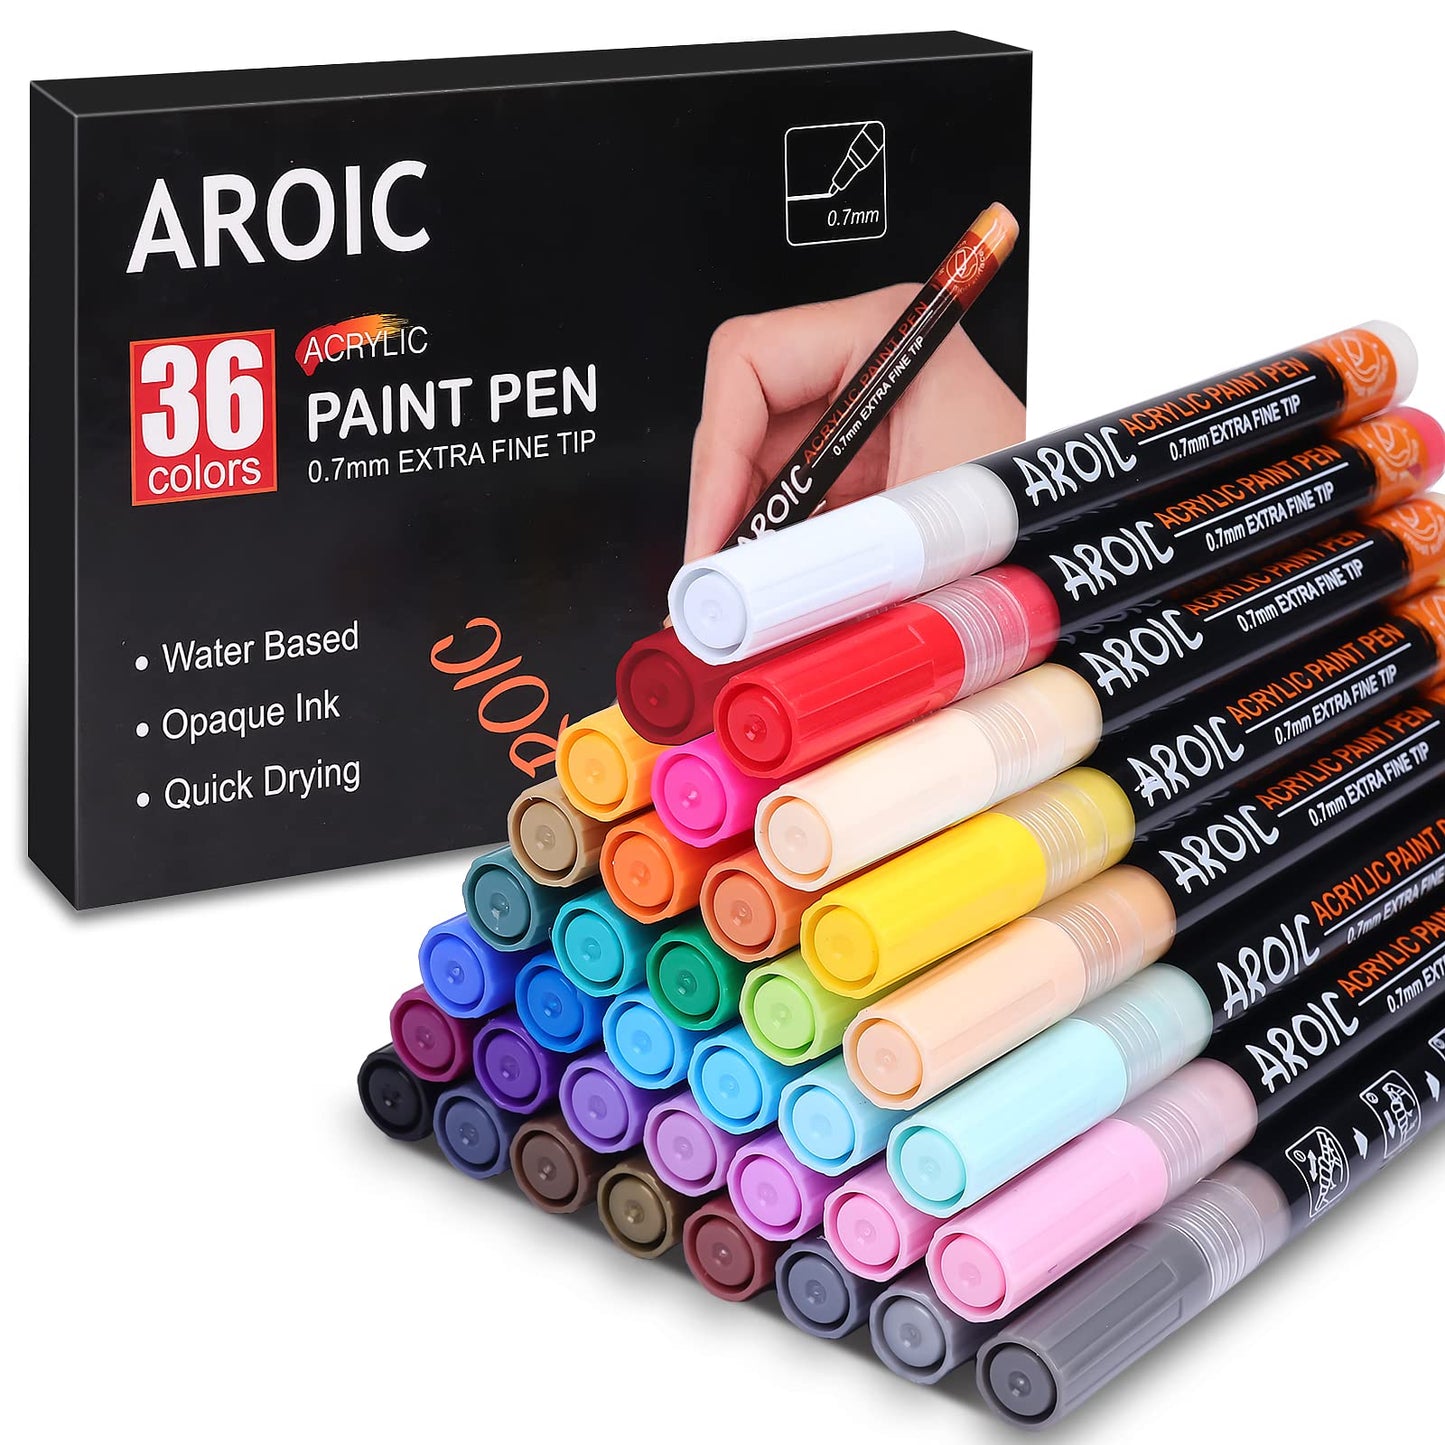 AROIC Paint Pens Paint Markers, 36 Packs Acrylic Paint markers for Writing on Any Material, Wood, Rock Painting, Glass, Ceramic, Canvas, Easter Egg